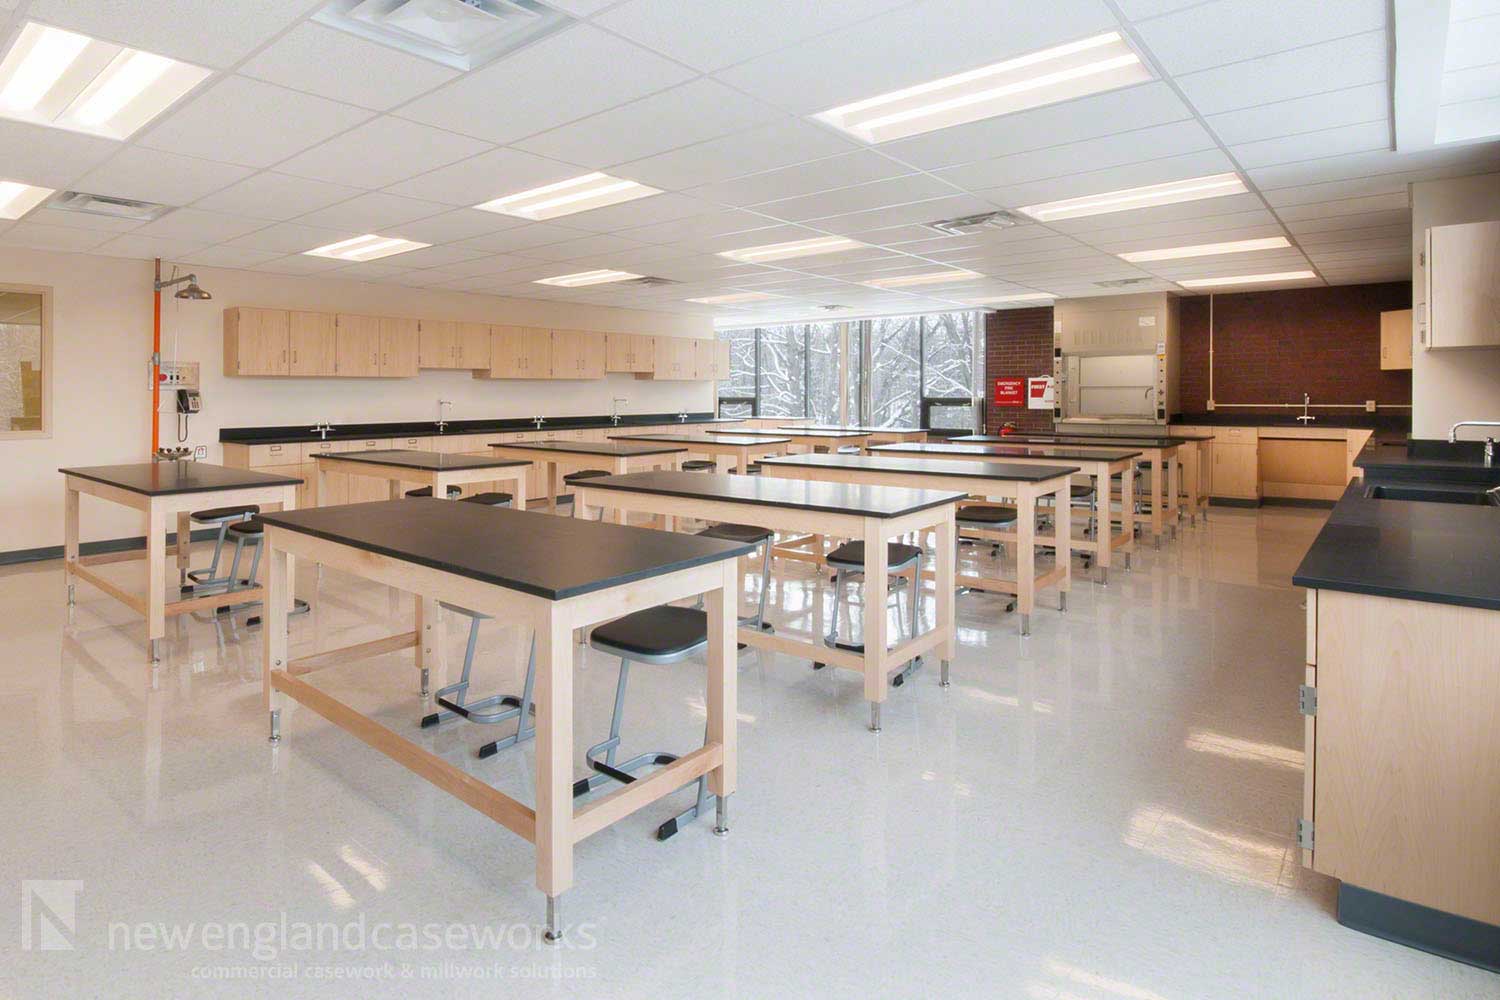 Casco Bay High School Science Lab casework Commercial Casework and Cabinets